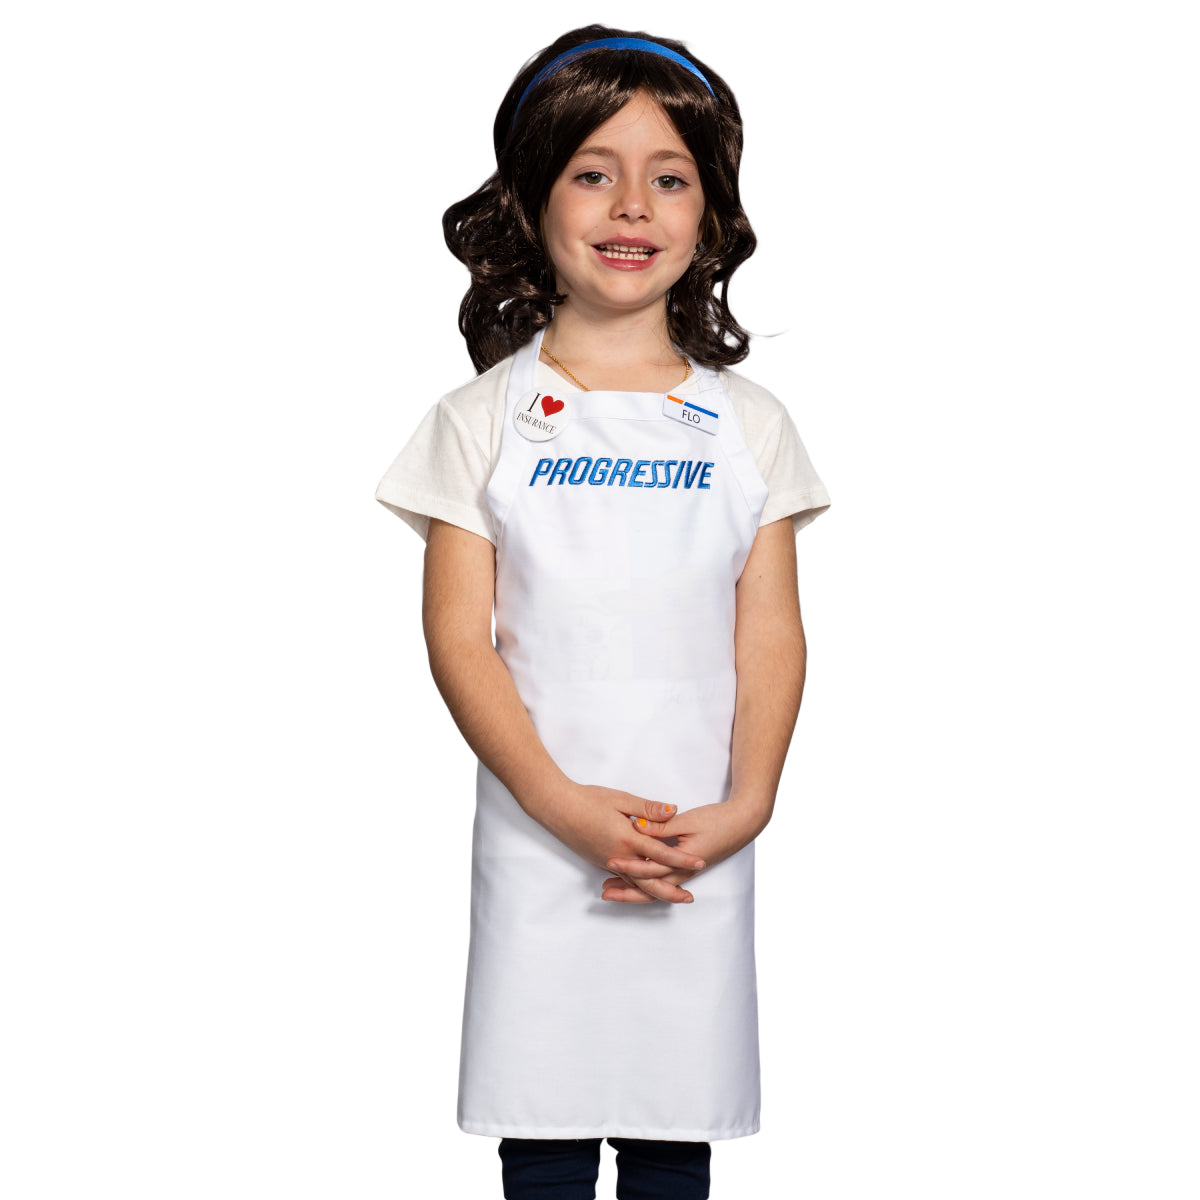 Get Flo-tastic with Flo Costume and Progressive Collection Kids Set